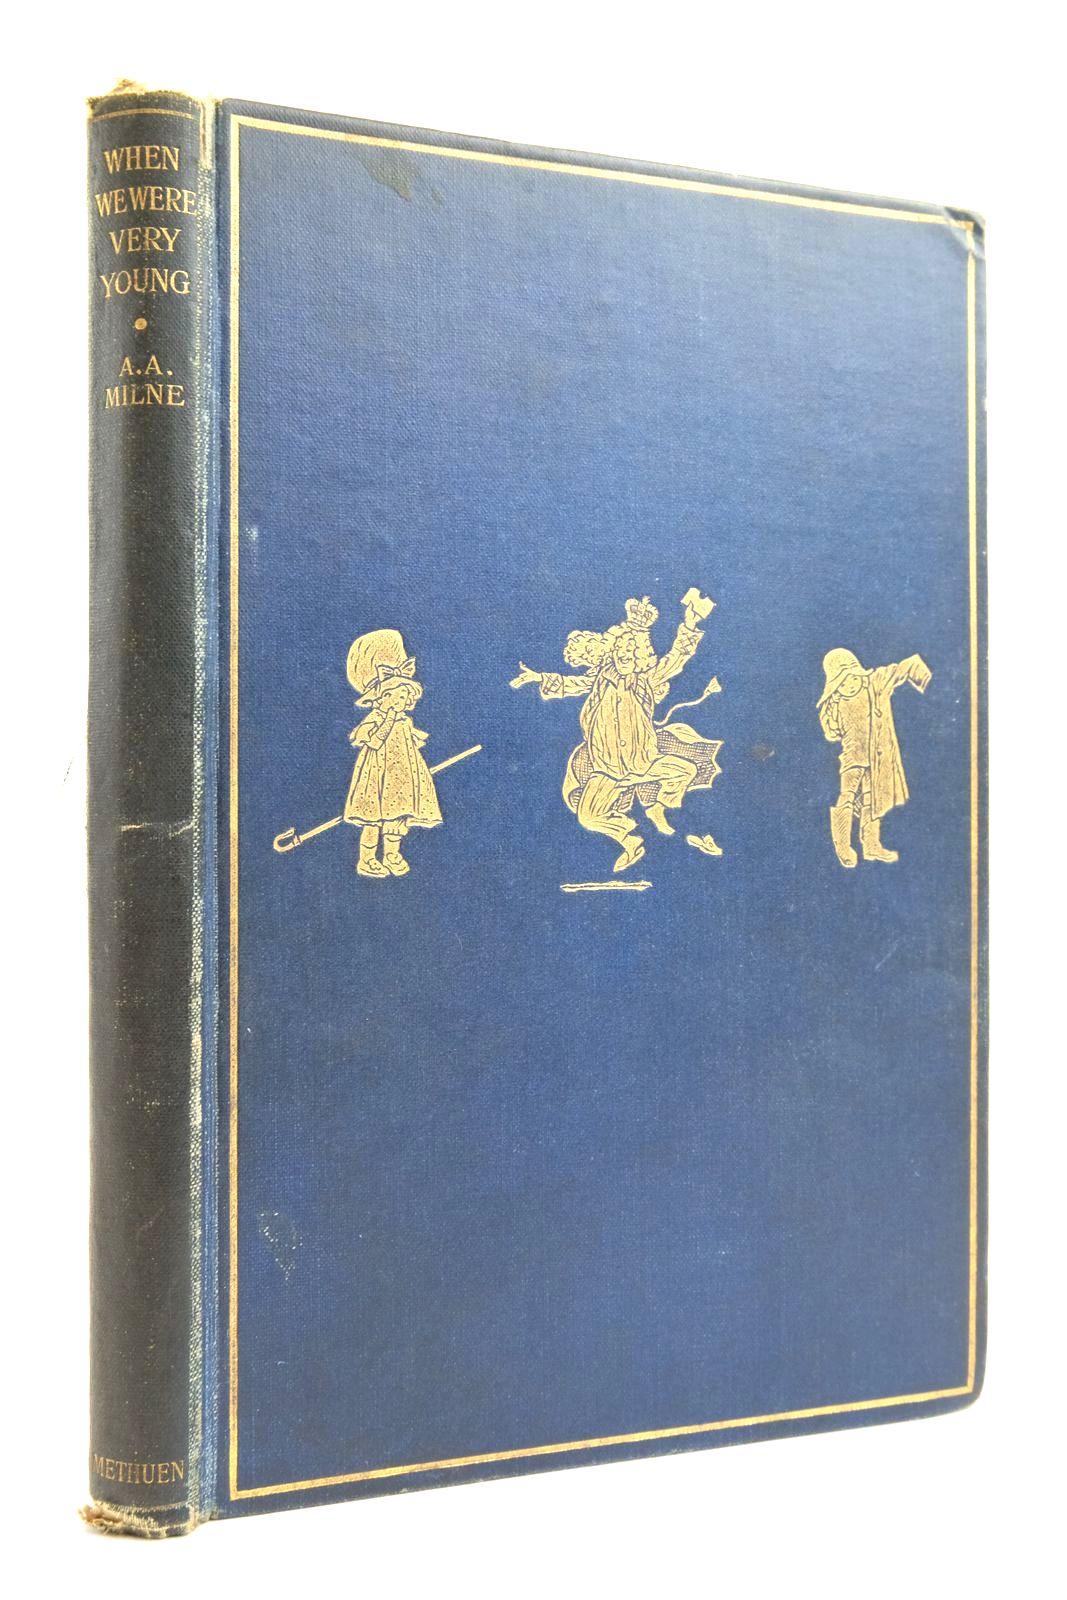 Photo of WHEN WE WERE VERY YOUNG written by Milne, A.A. illustrated by Shepard, E.H. published by Methuen &amp; Co. Ltd. (STOCK CODE: 2136224)  for sale by Stella & Rose's Books